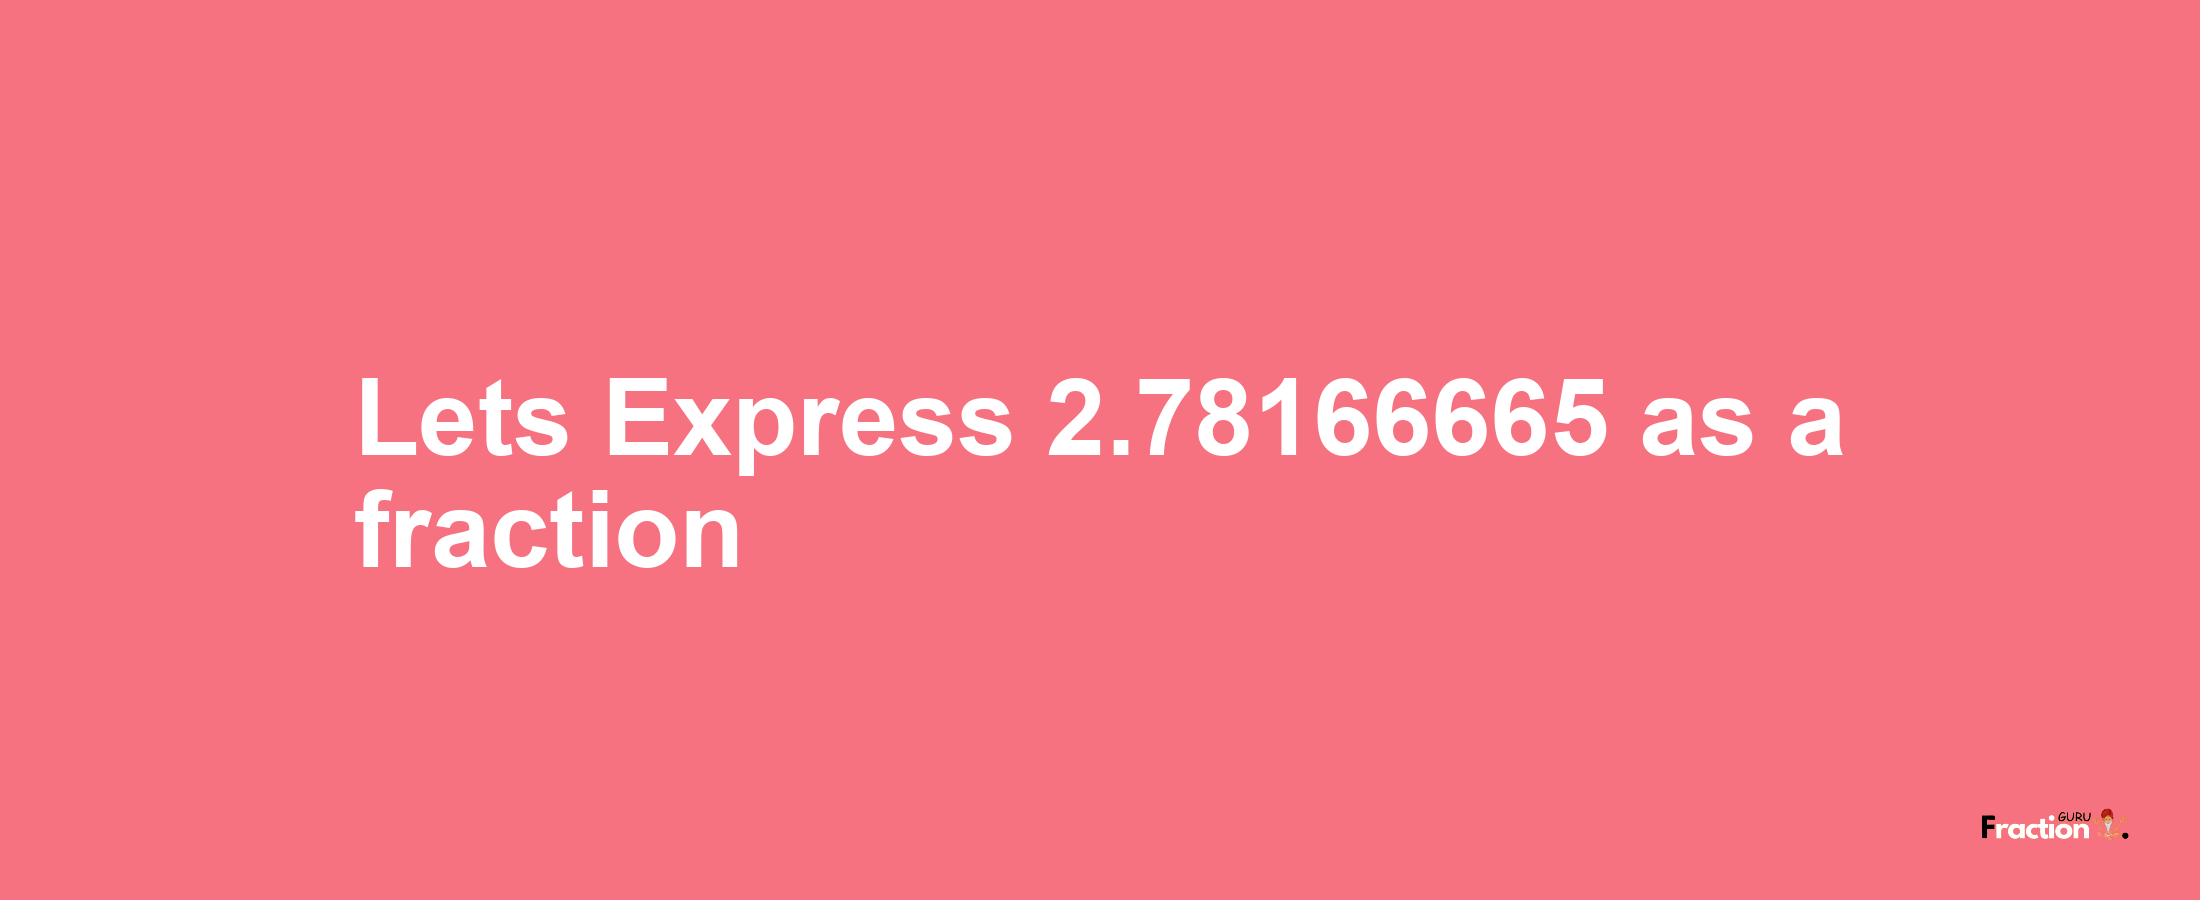 Lets Express 2.78166665 as afraction